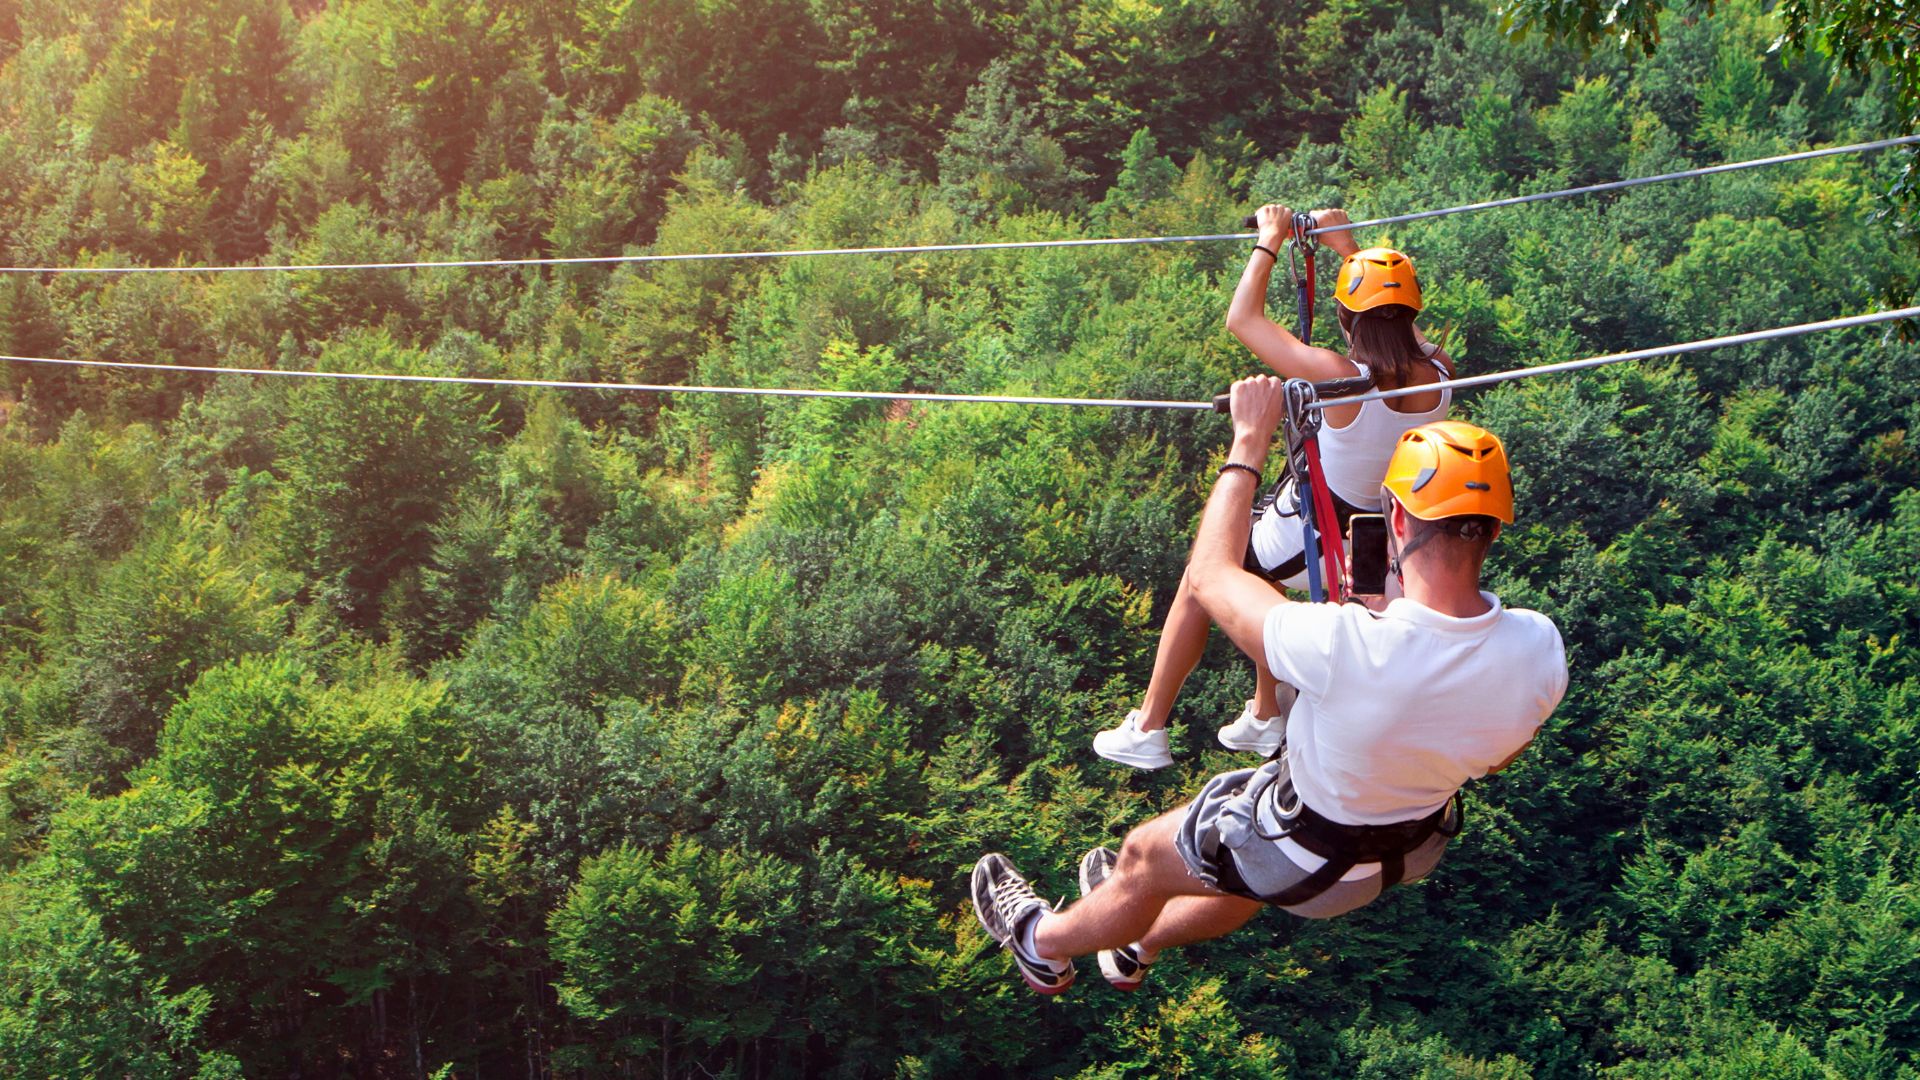 Couple ziplineing over the lush green tree tops